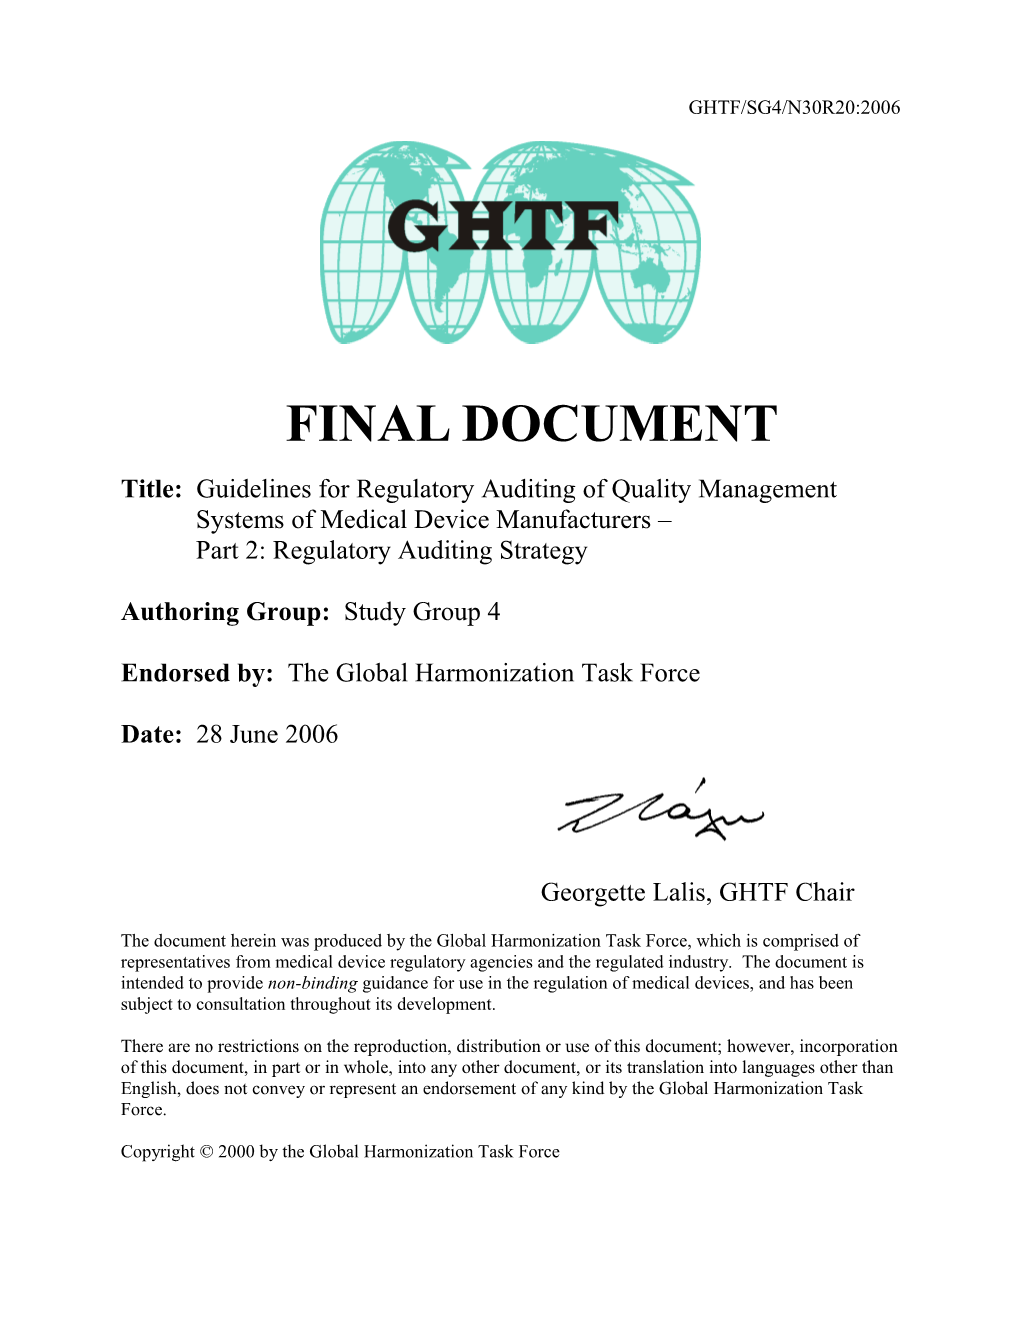 GHTF SG4 Auditing of QMS of Medical Device Manufacturers-Part 2 Audit Strategies